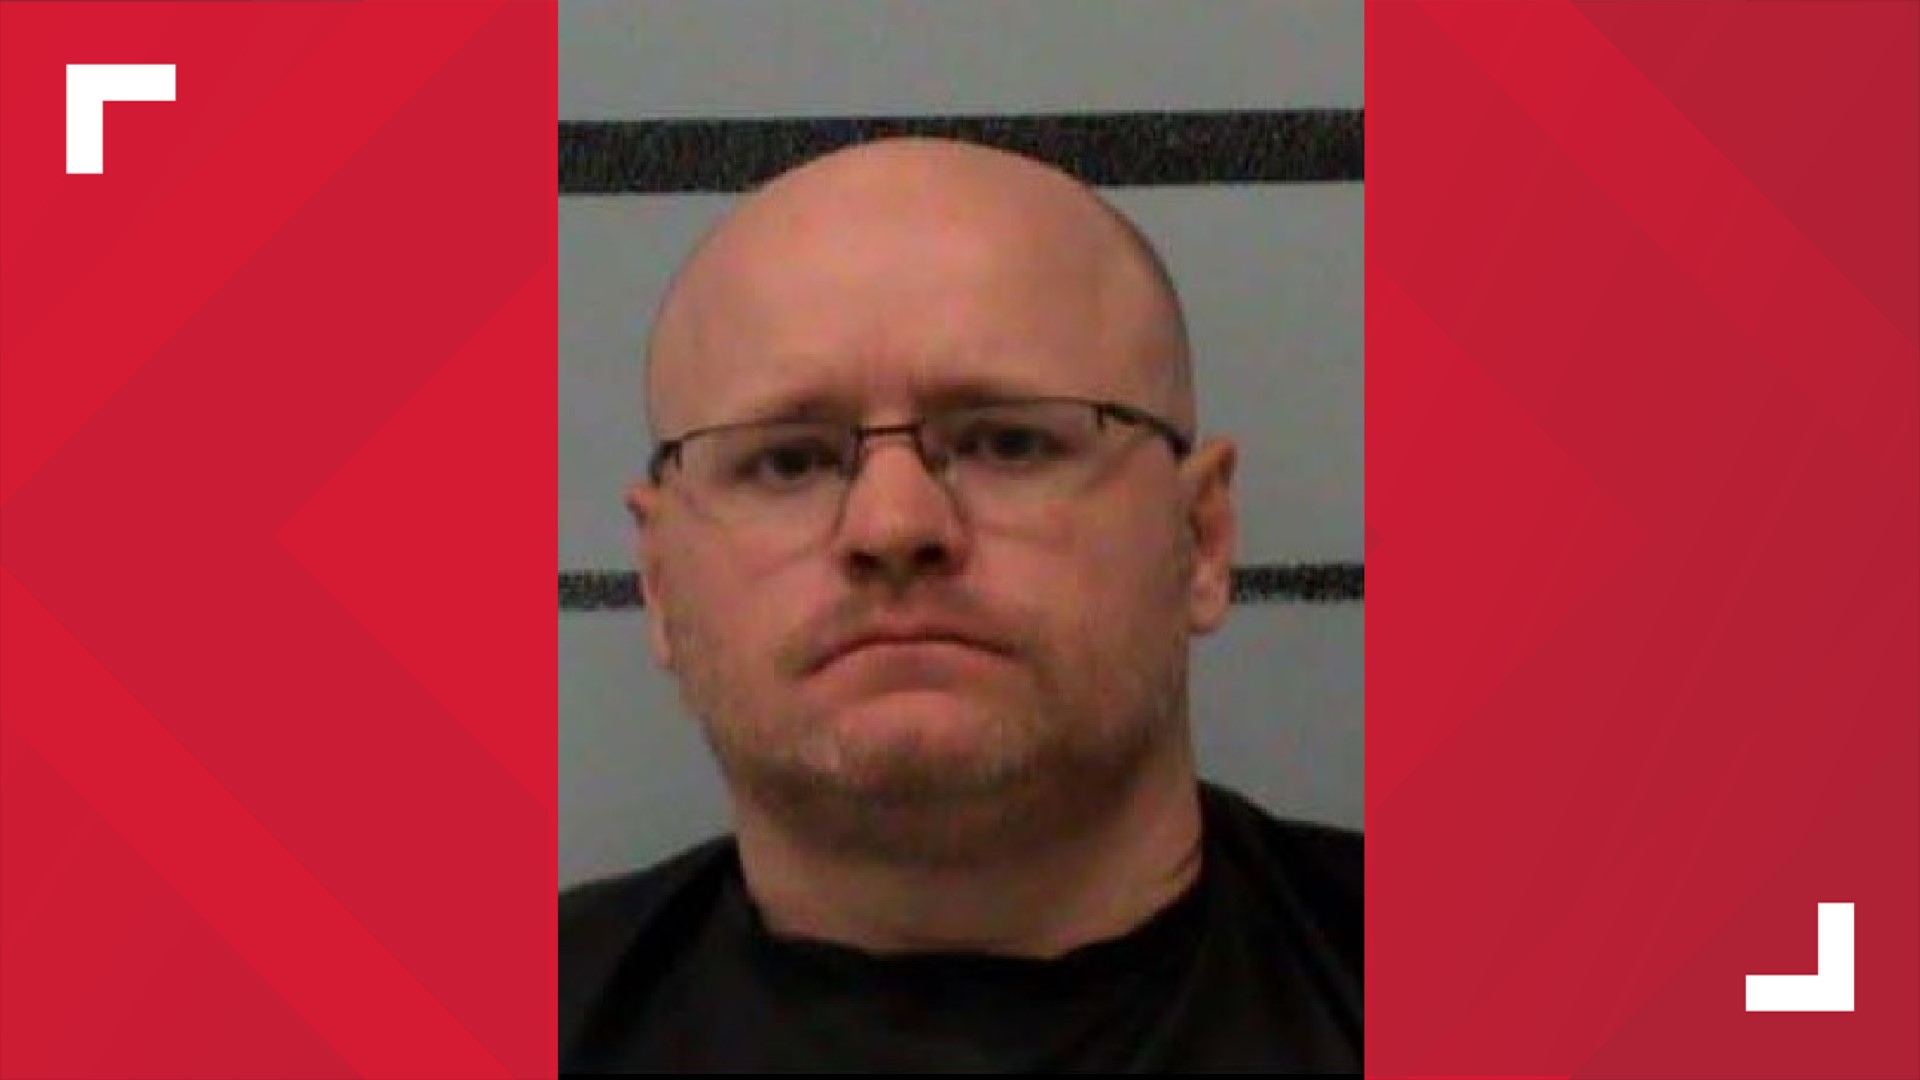 While the district didn’t specify what the arrest was for, a man by the same name, Douglas Hampton, was arrested in a central Lubbock human trafficking operation.